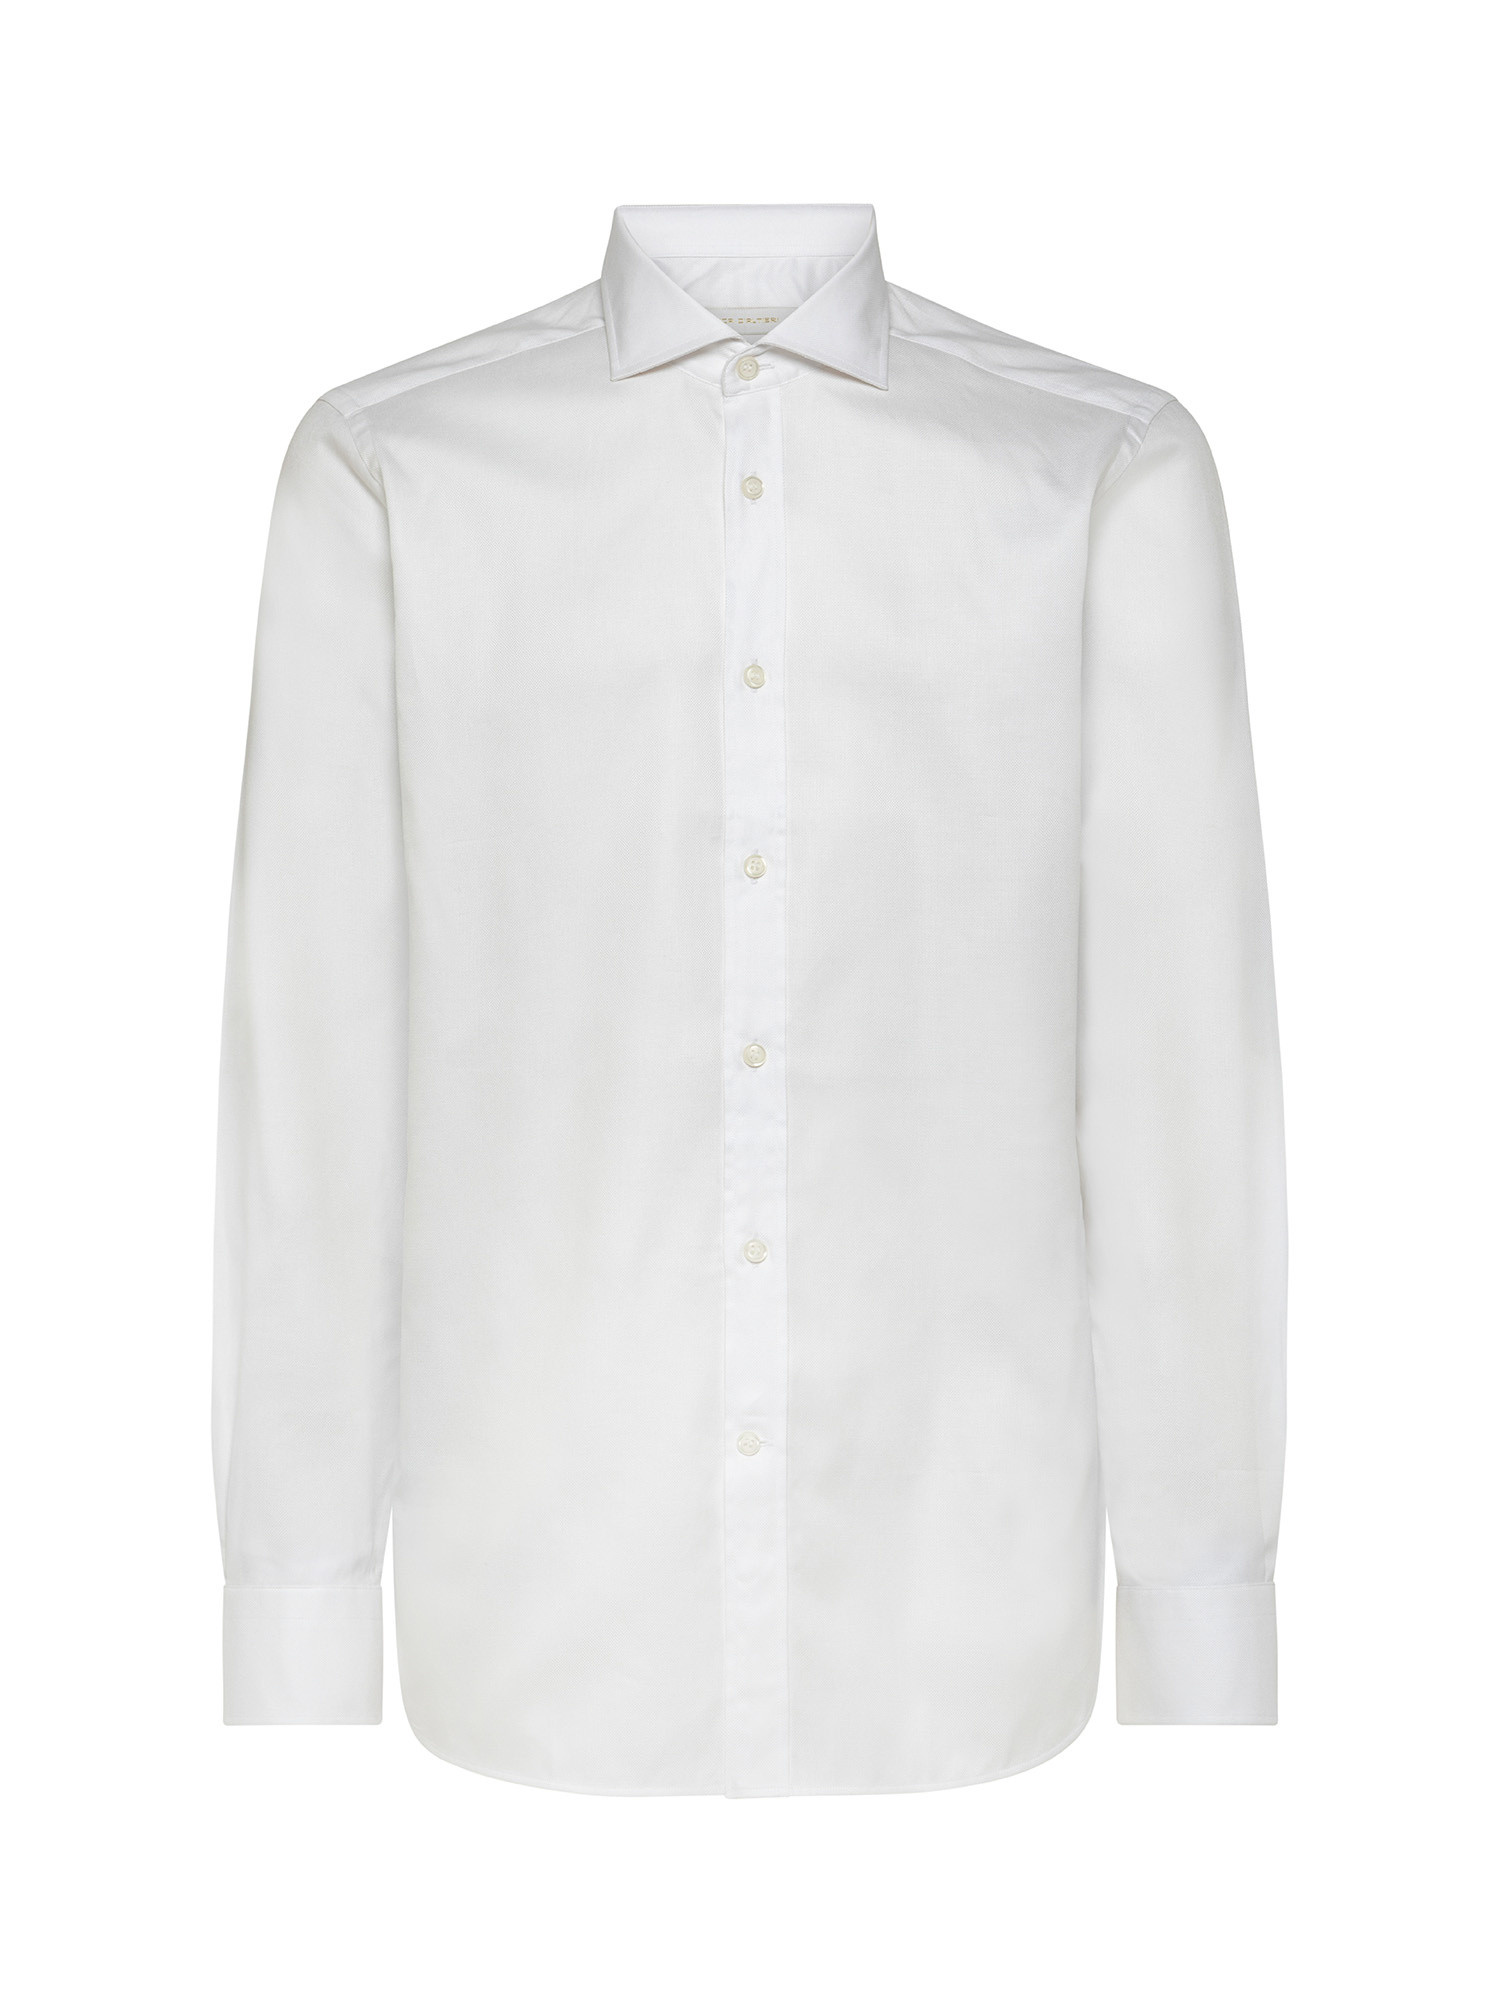 Slim fit shirt in pure cotton, White 1, large image number 1